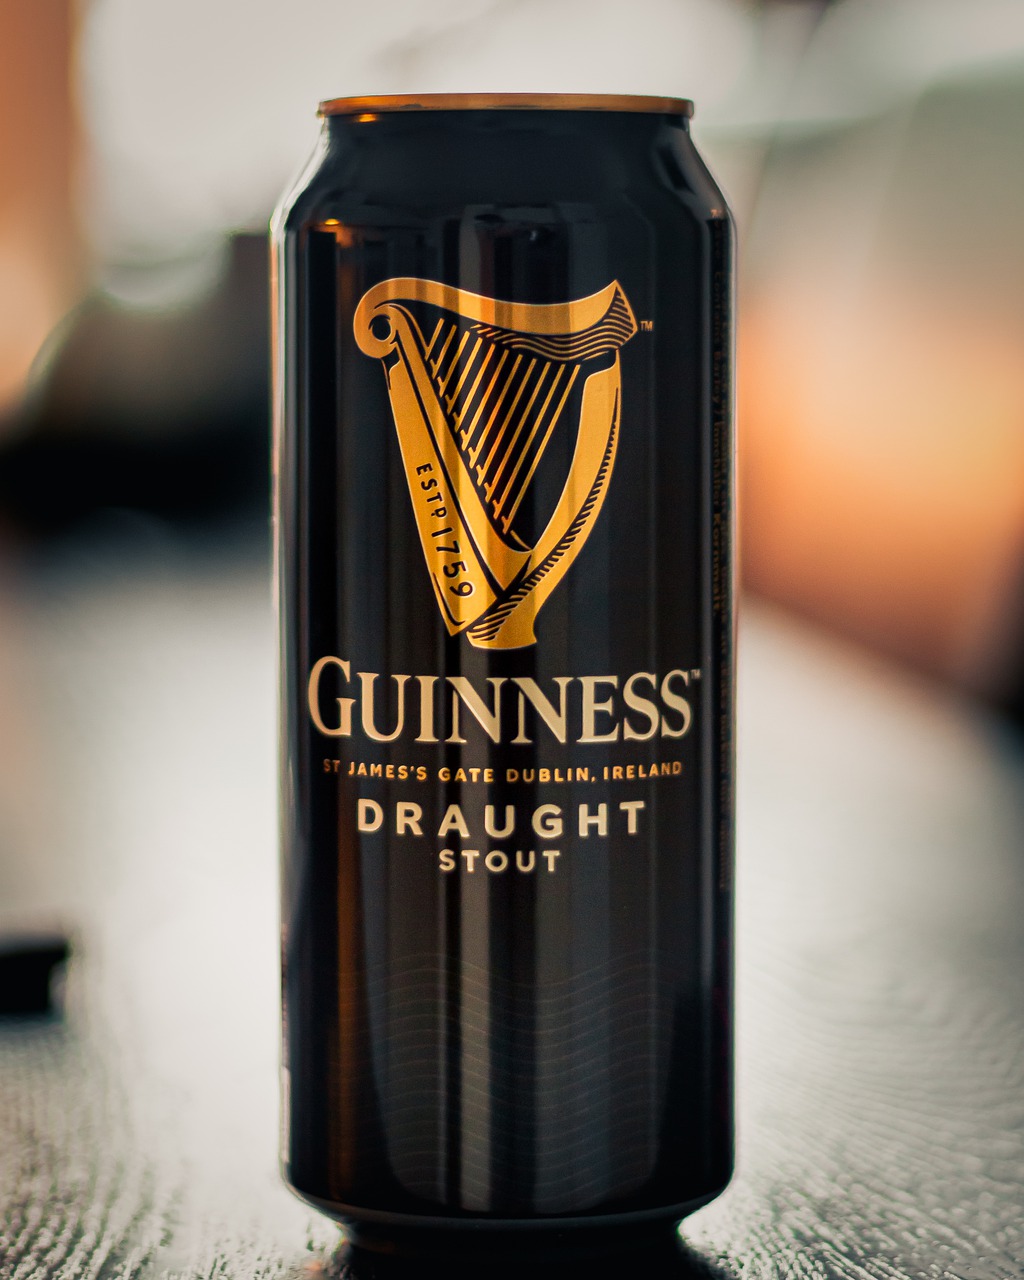 Guinness Beer: History, Types, Secrets of Success | The Beer Connoisseur®